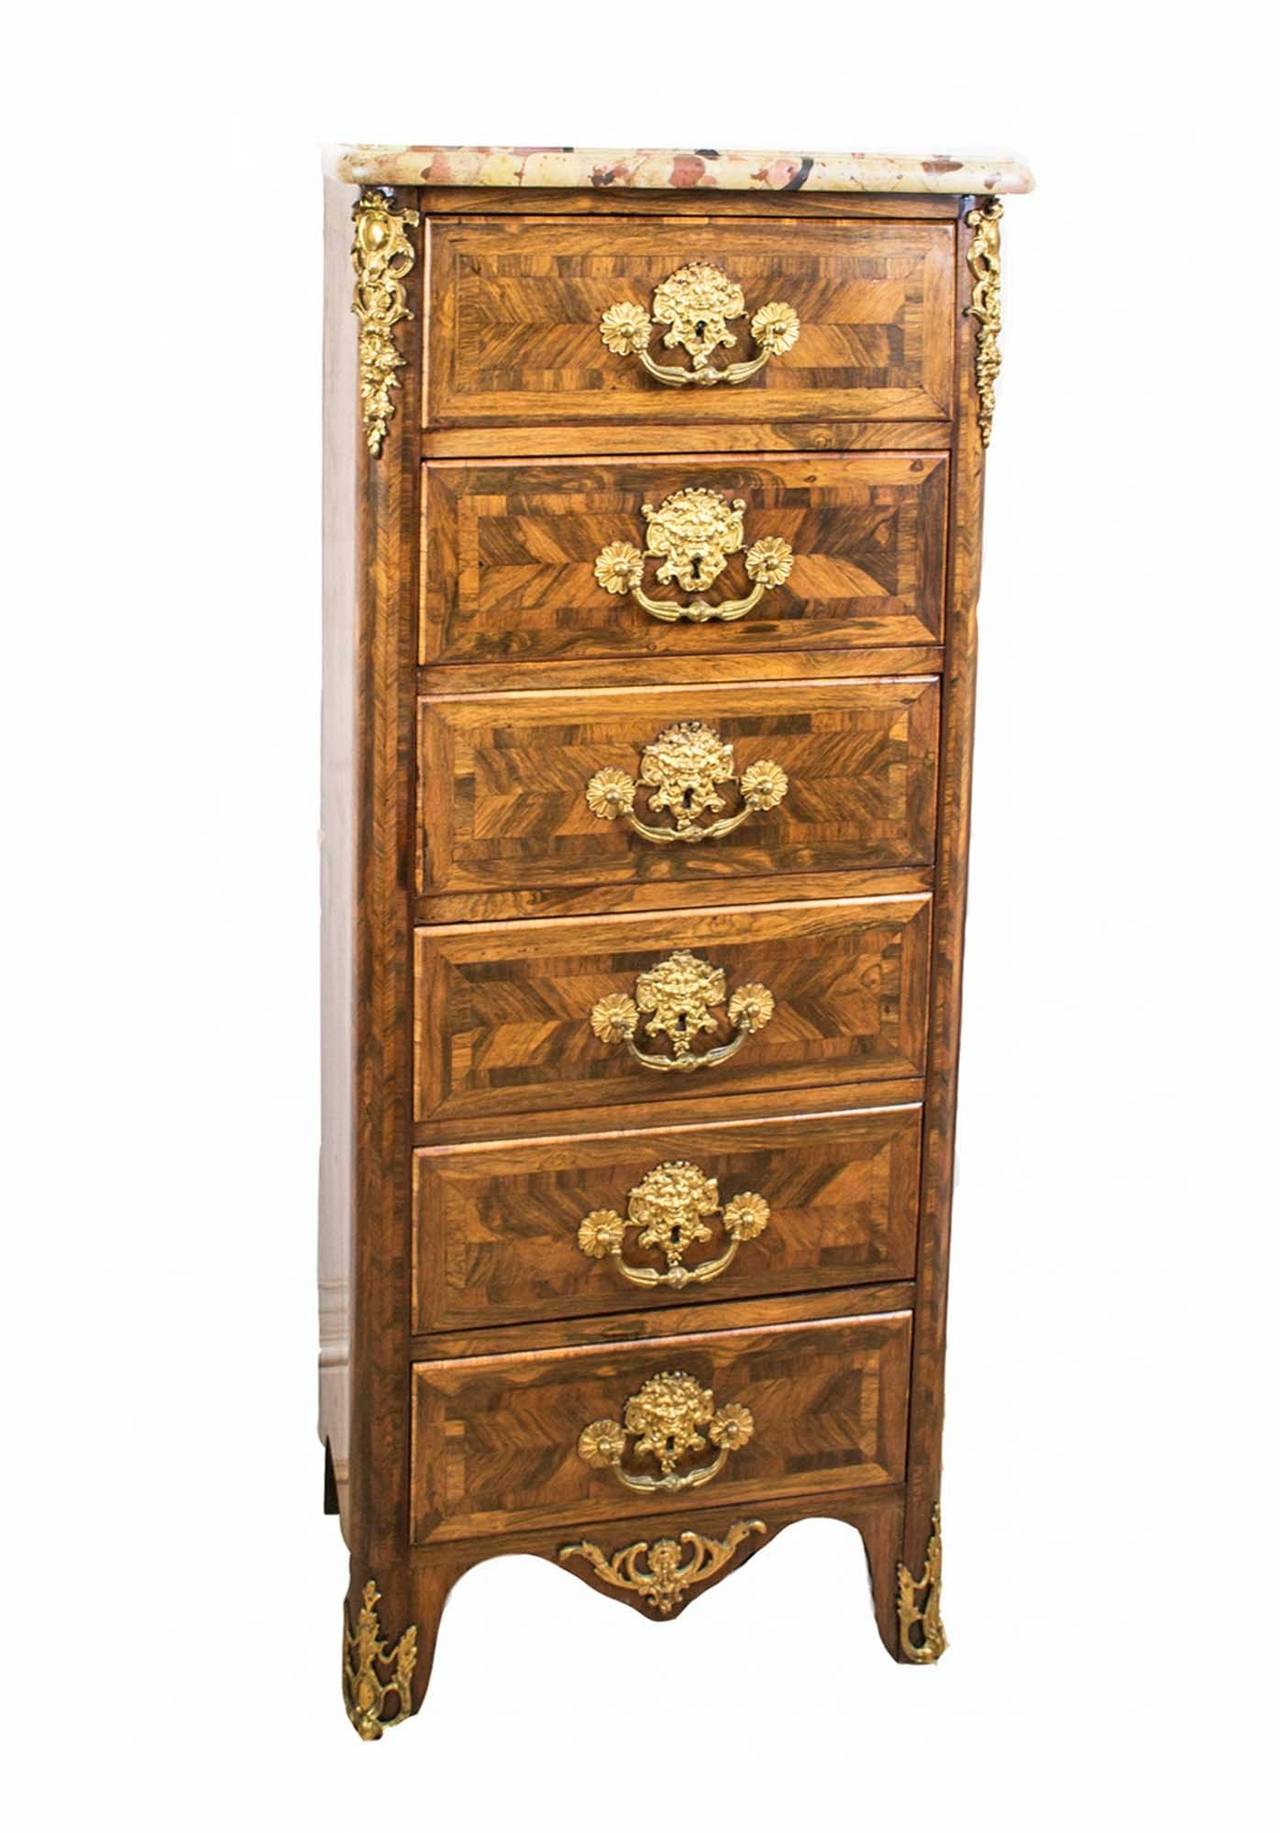 This is a beautiful antique French rosewood semainier or tall chest, circa 1860 in date. 

This piece was skillfully crafted in rosewood and features fabulous ormolu handles and mounts. 

It has six drawers all with original locks and handles.